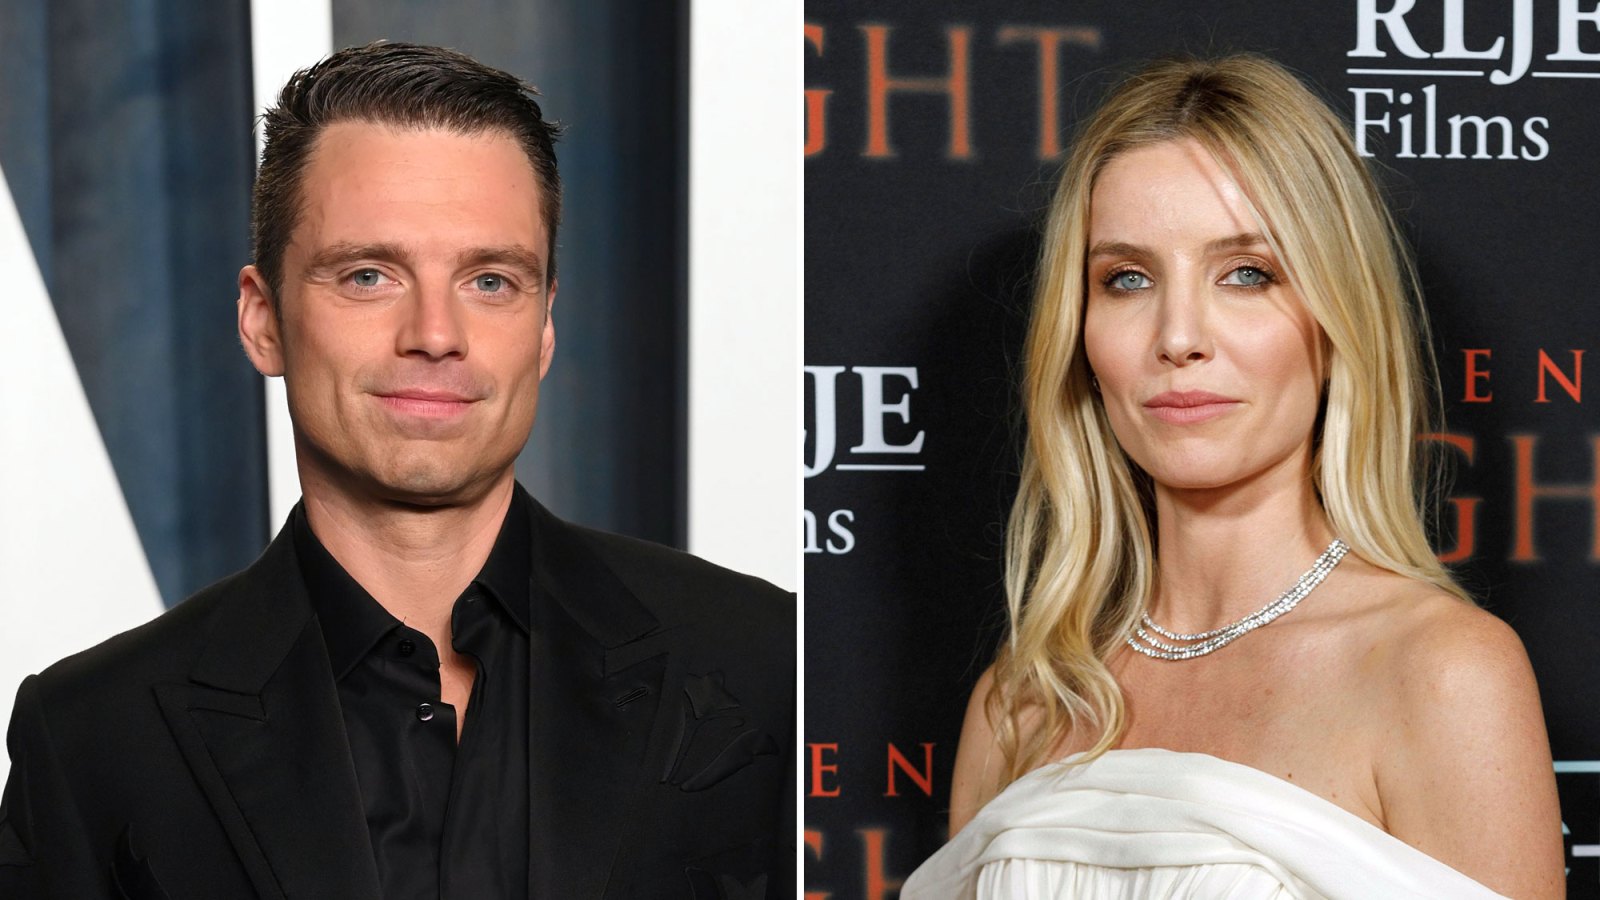 Sebastian Stan Gets Close With Annabelle Wallis in Seemingly Flirty Birthday Party Snap